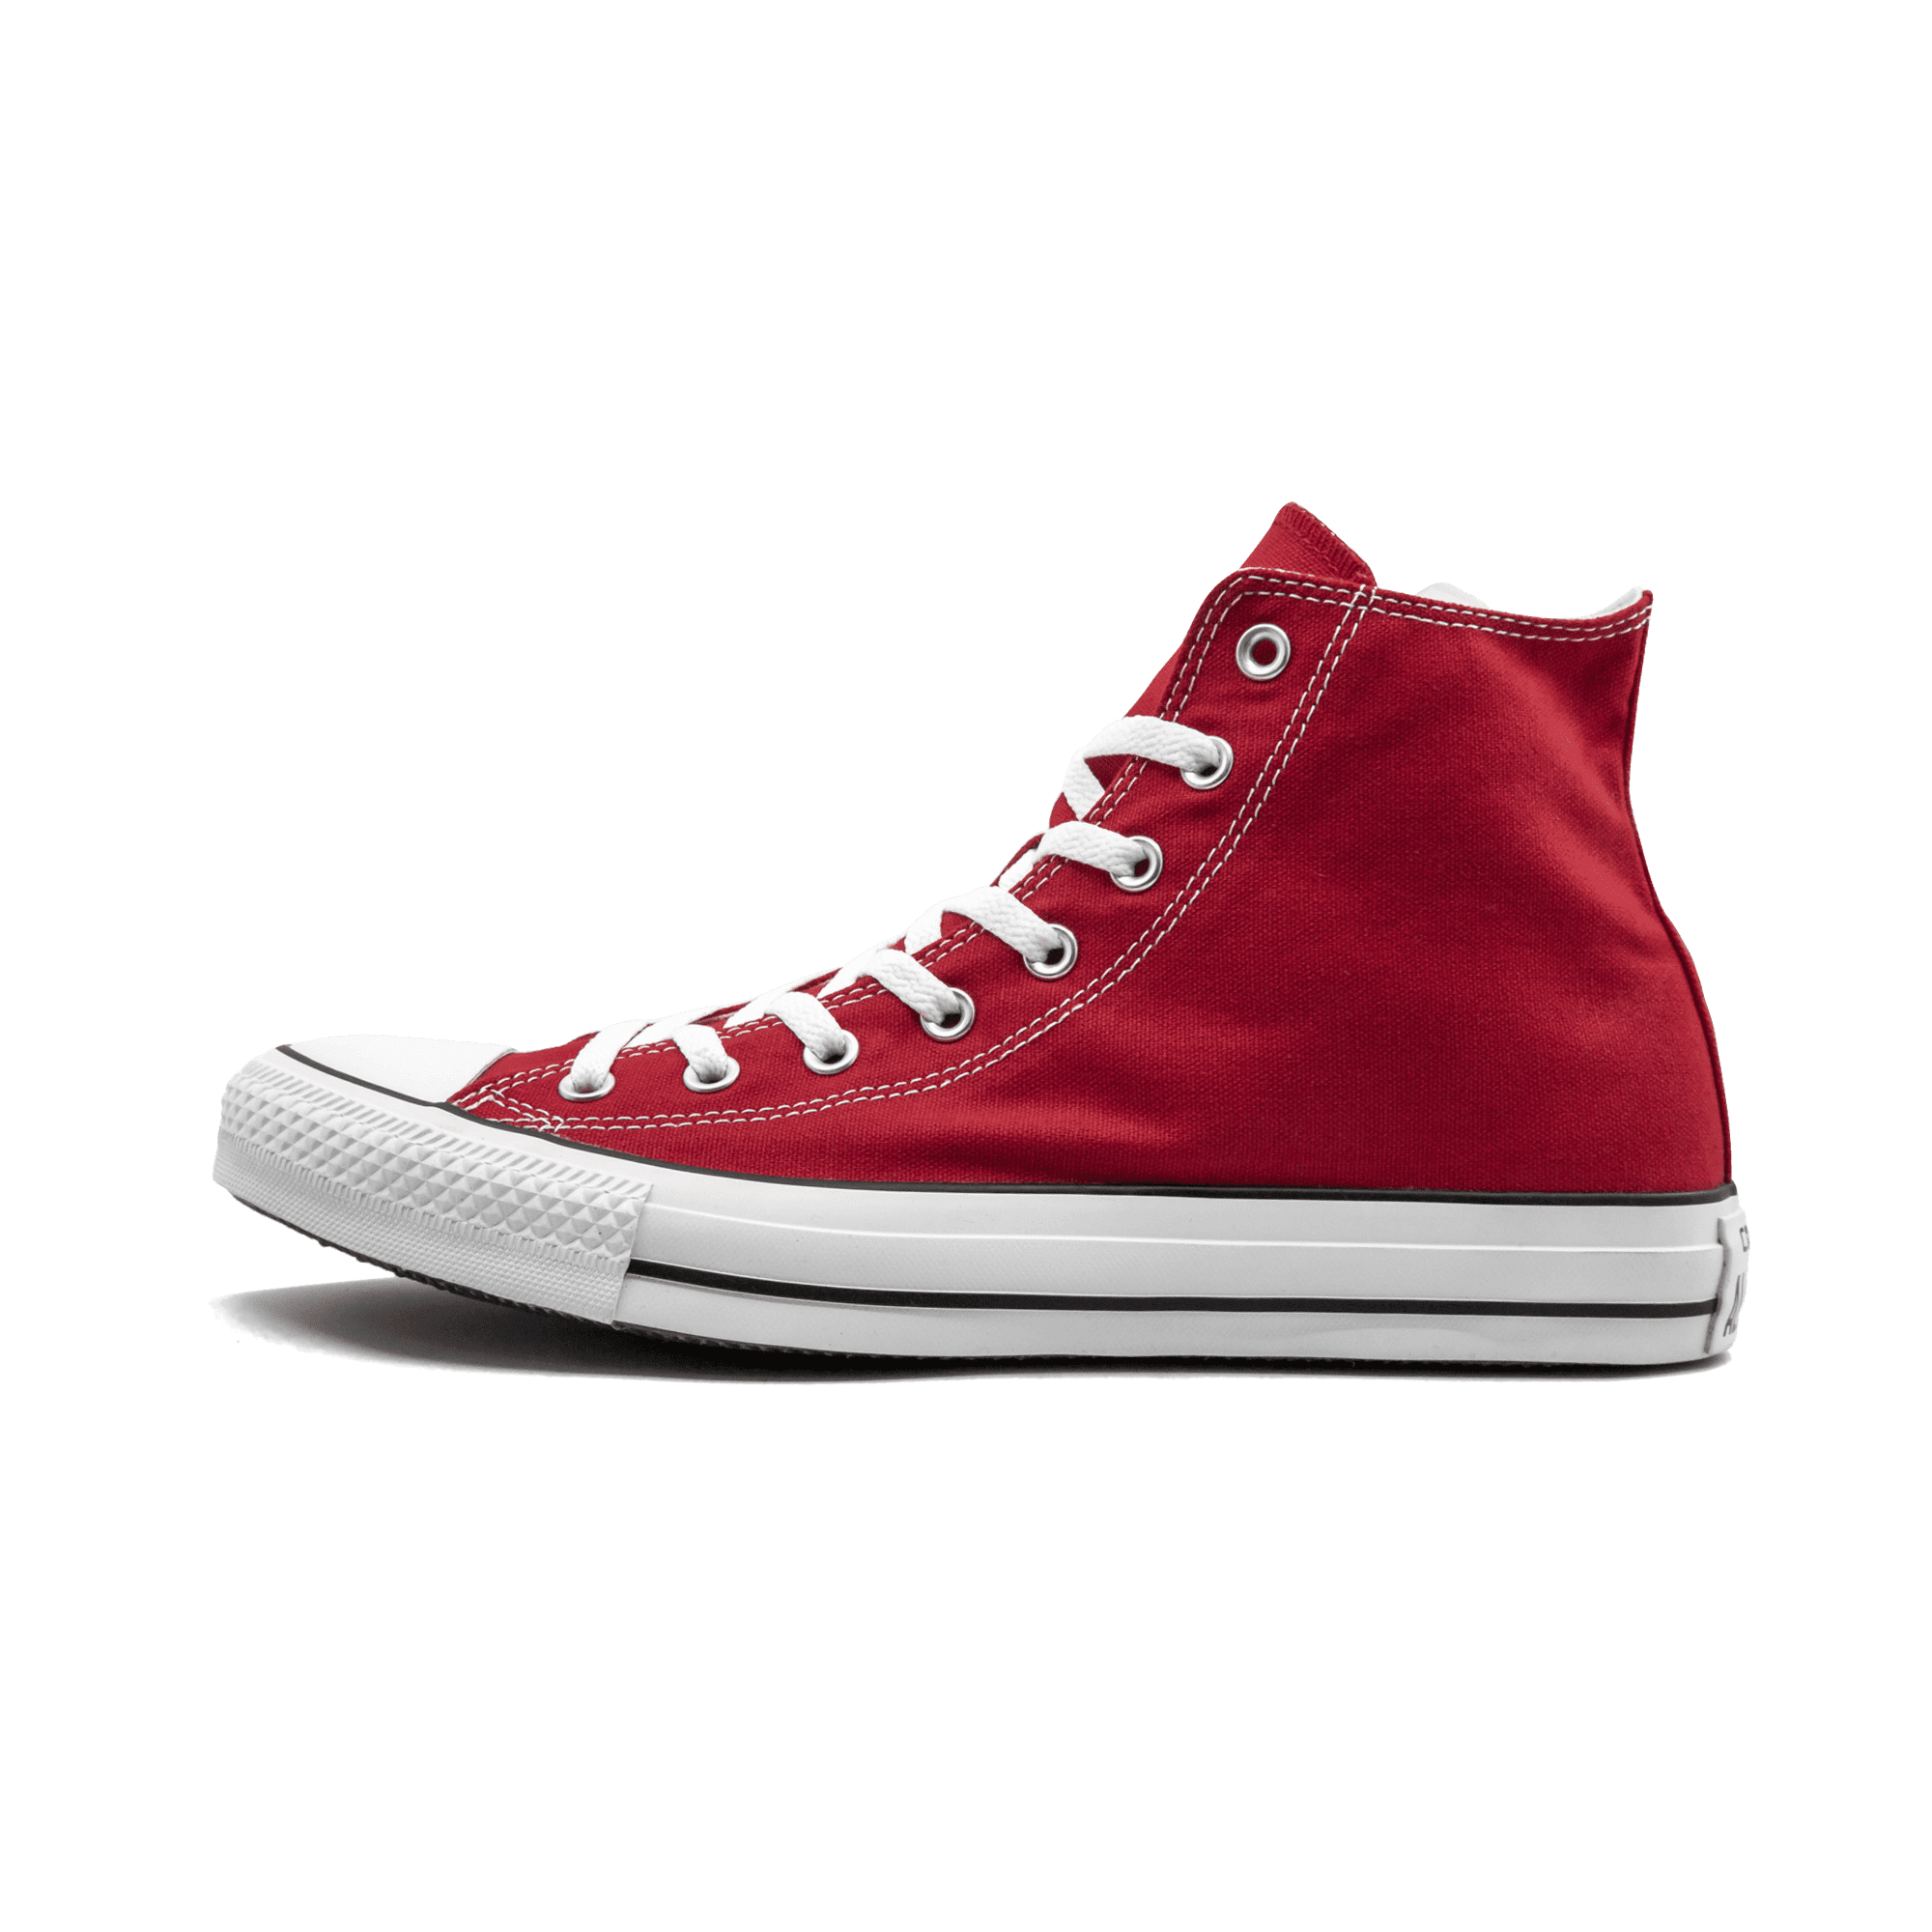 Converse Chuck Taylor All Star Hi  “Red” - Manore Store